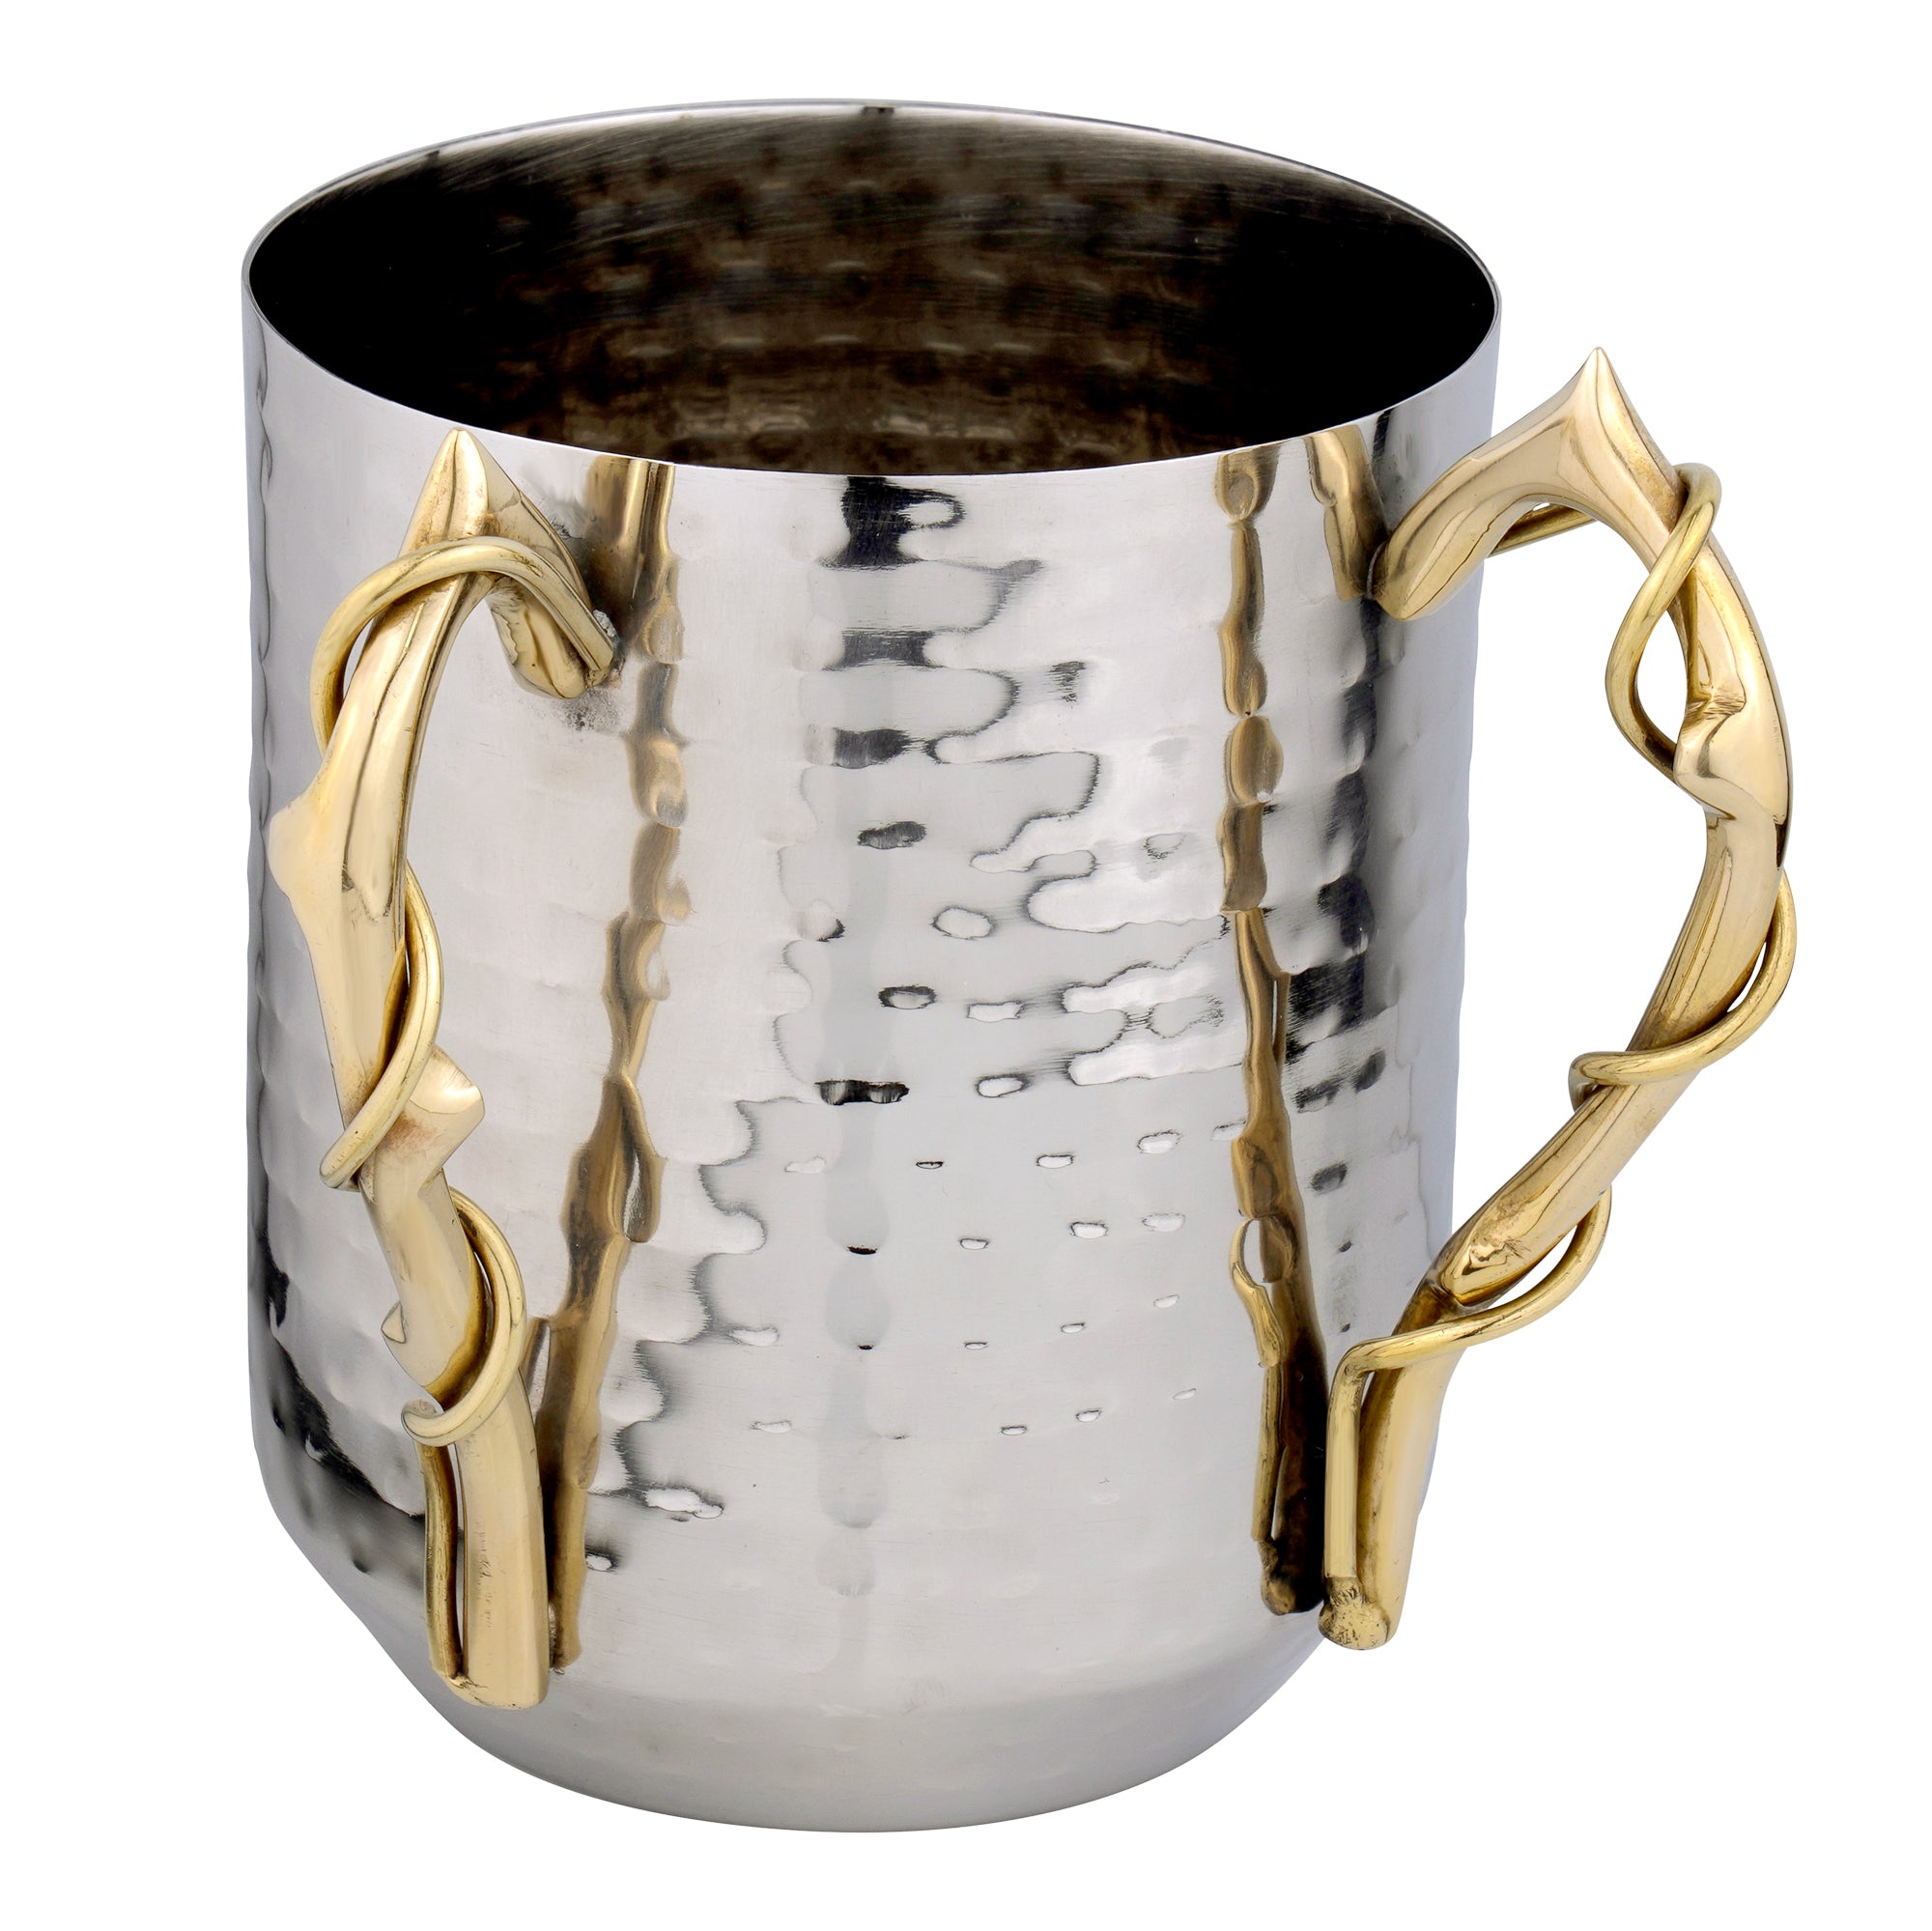 Stainless Steel Hammered Wash Cup with Intricate Handles